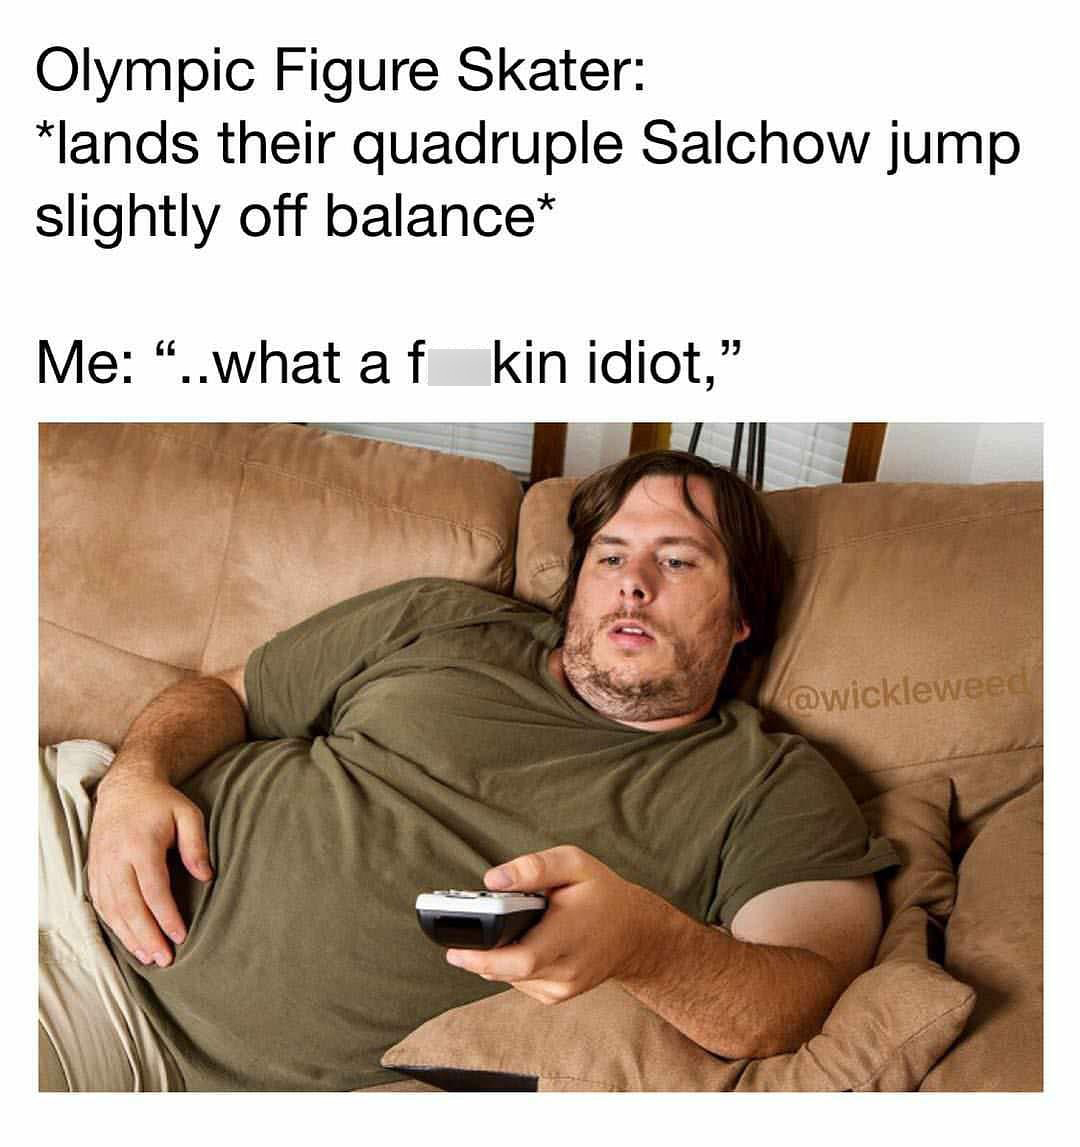 funny picture of a fucking idiot meme - Olympic Figure Skater lands their quadruple Salchow jump slightly off balance Me ..what af kin idiot,